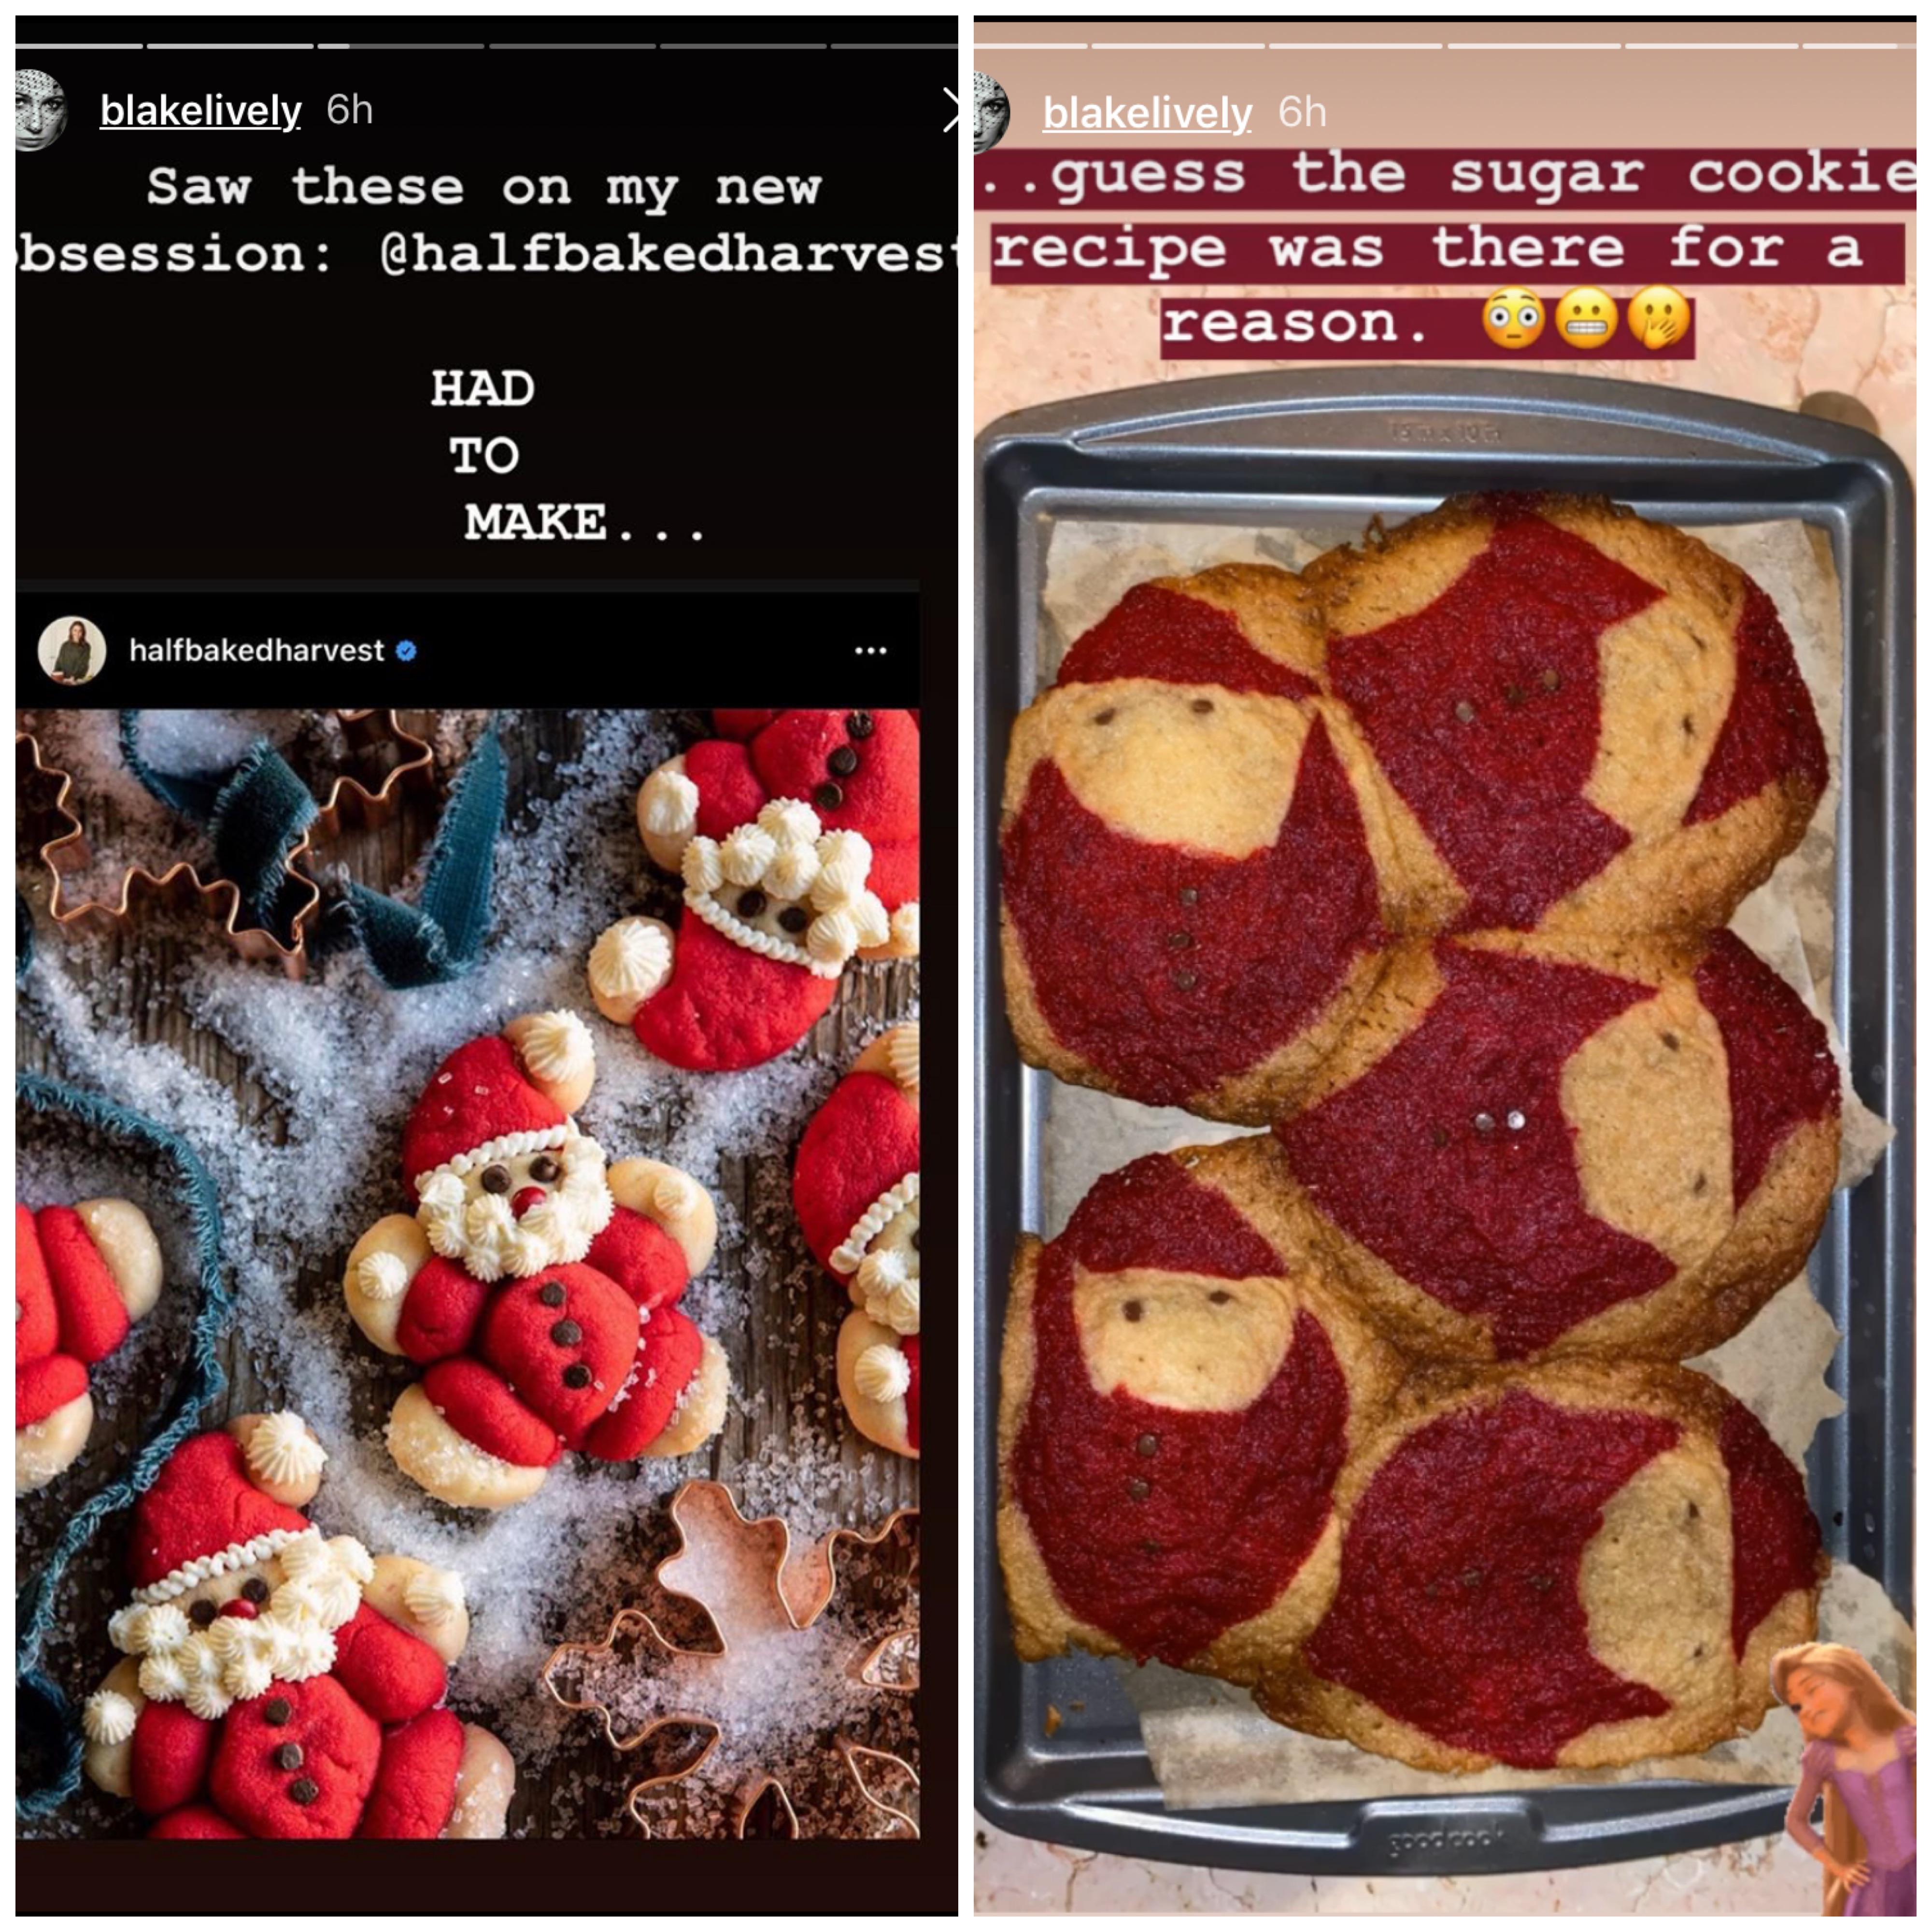 baking - blakelively 6h blakelively Gh Saw these on my new ..guess the sugar cookie bsession recipe was there for a reason. Had Make... haltbakedharvest